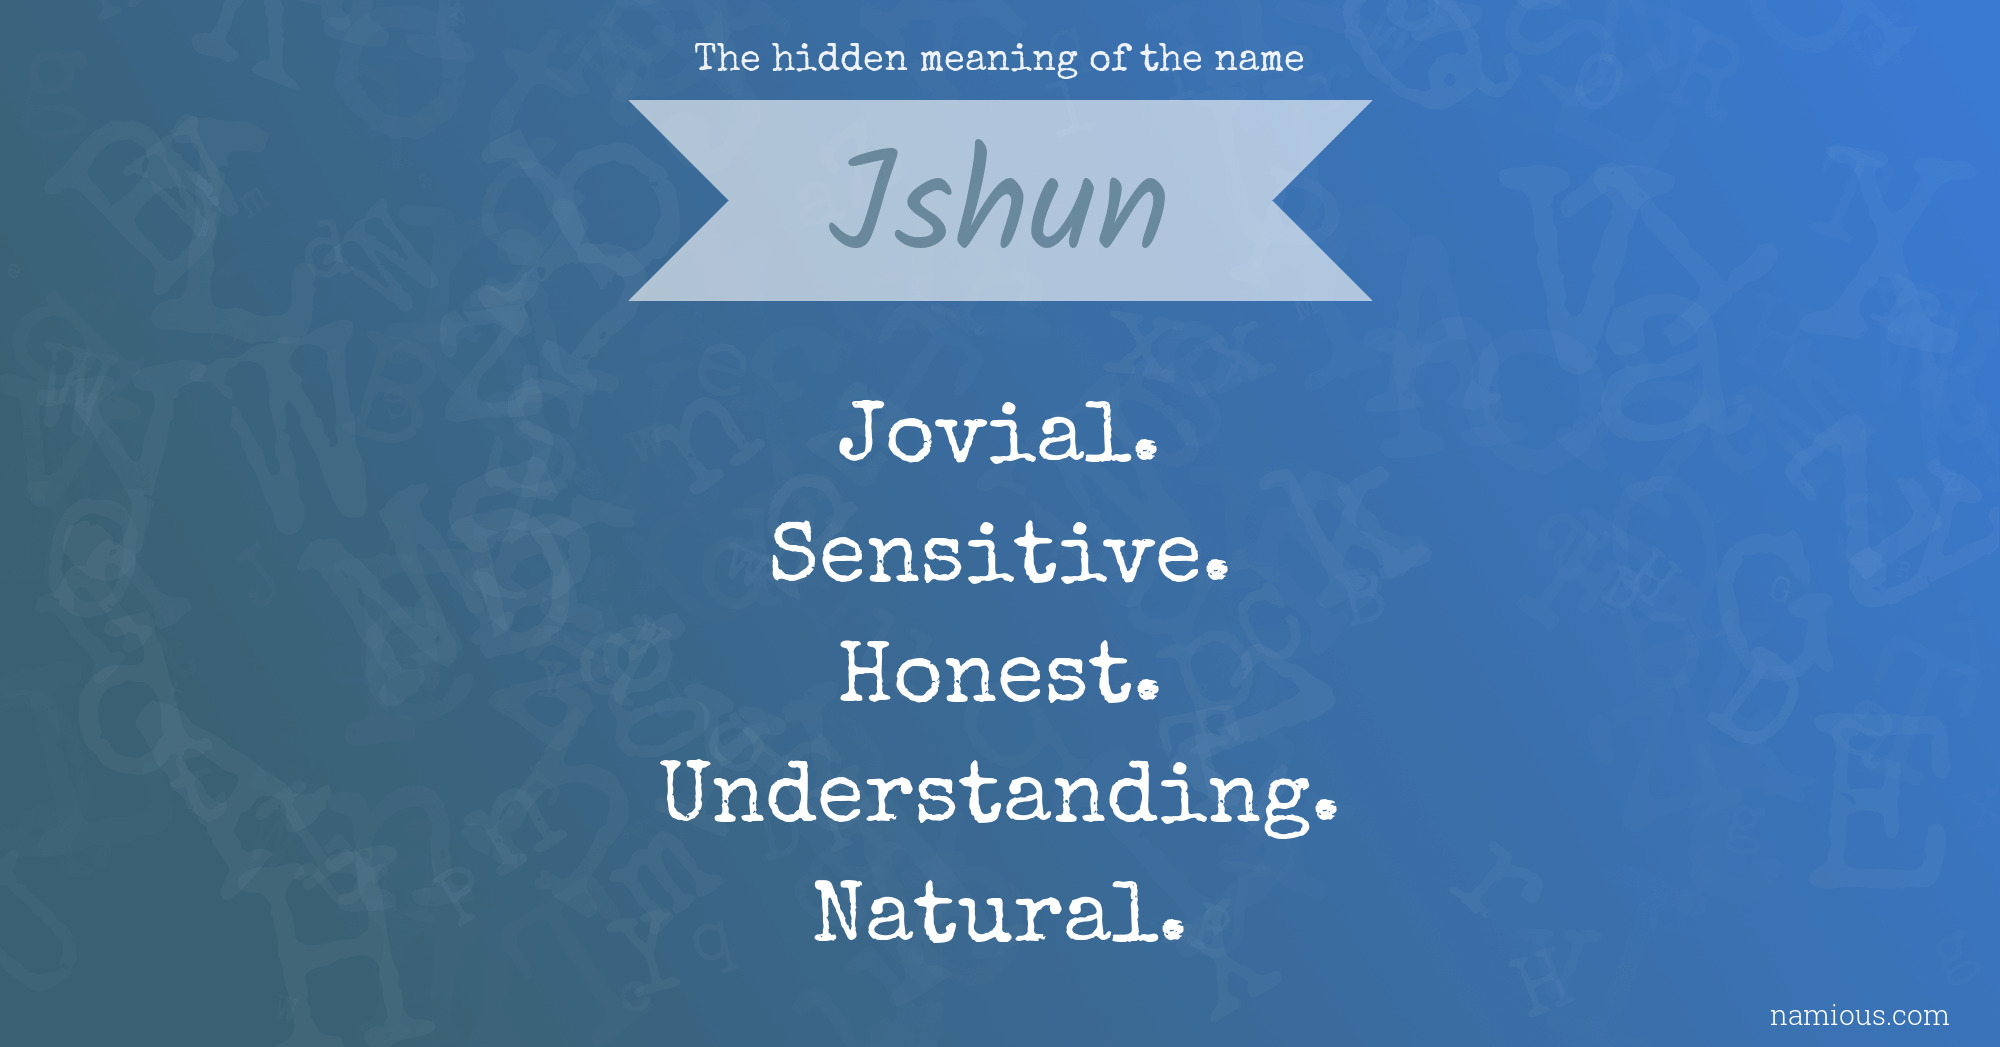 The hidden meaning of the name Jshun